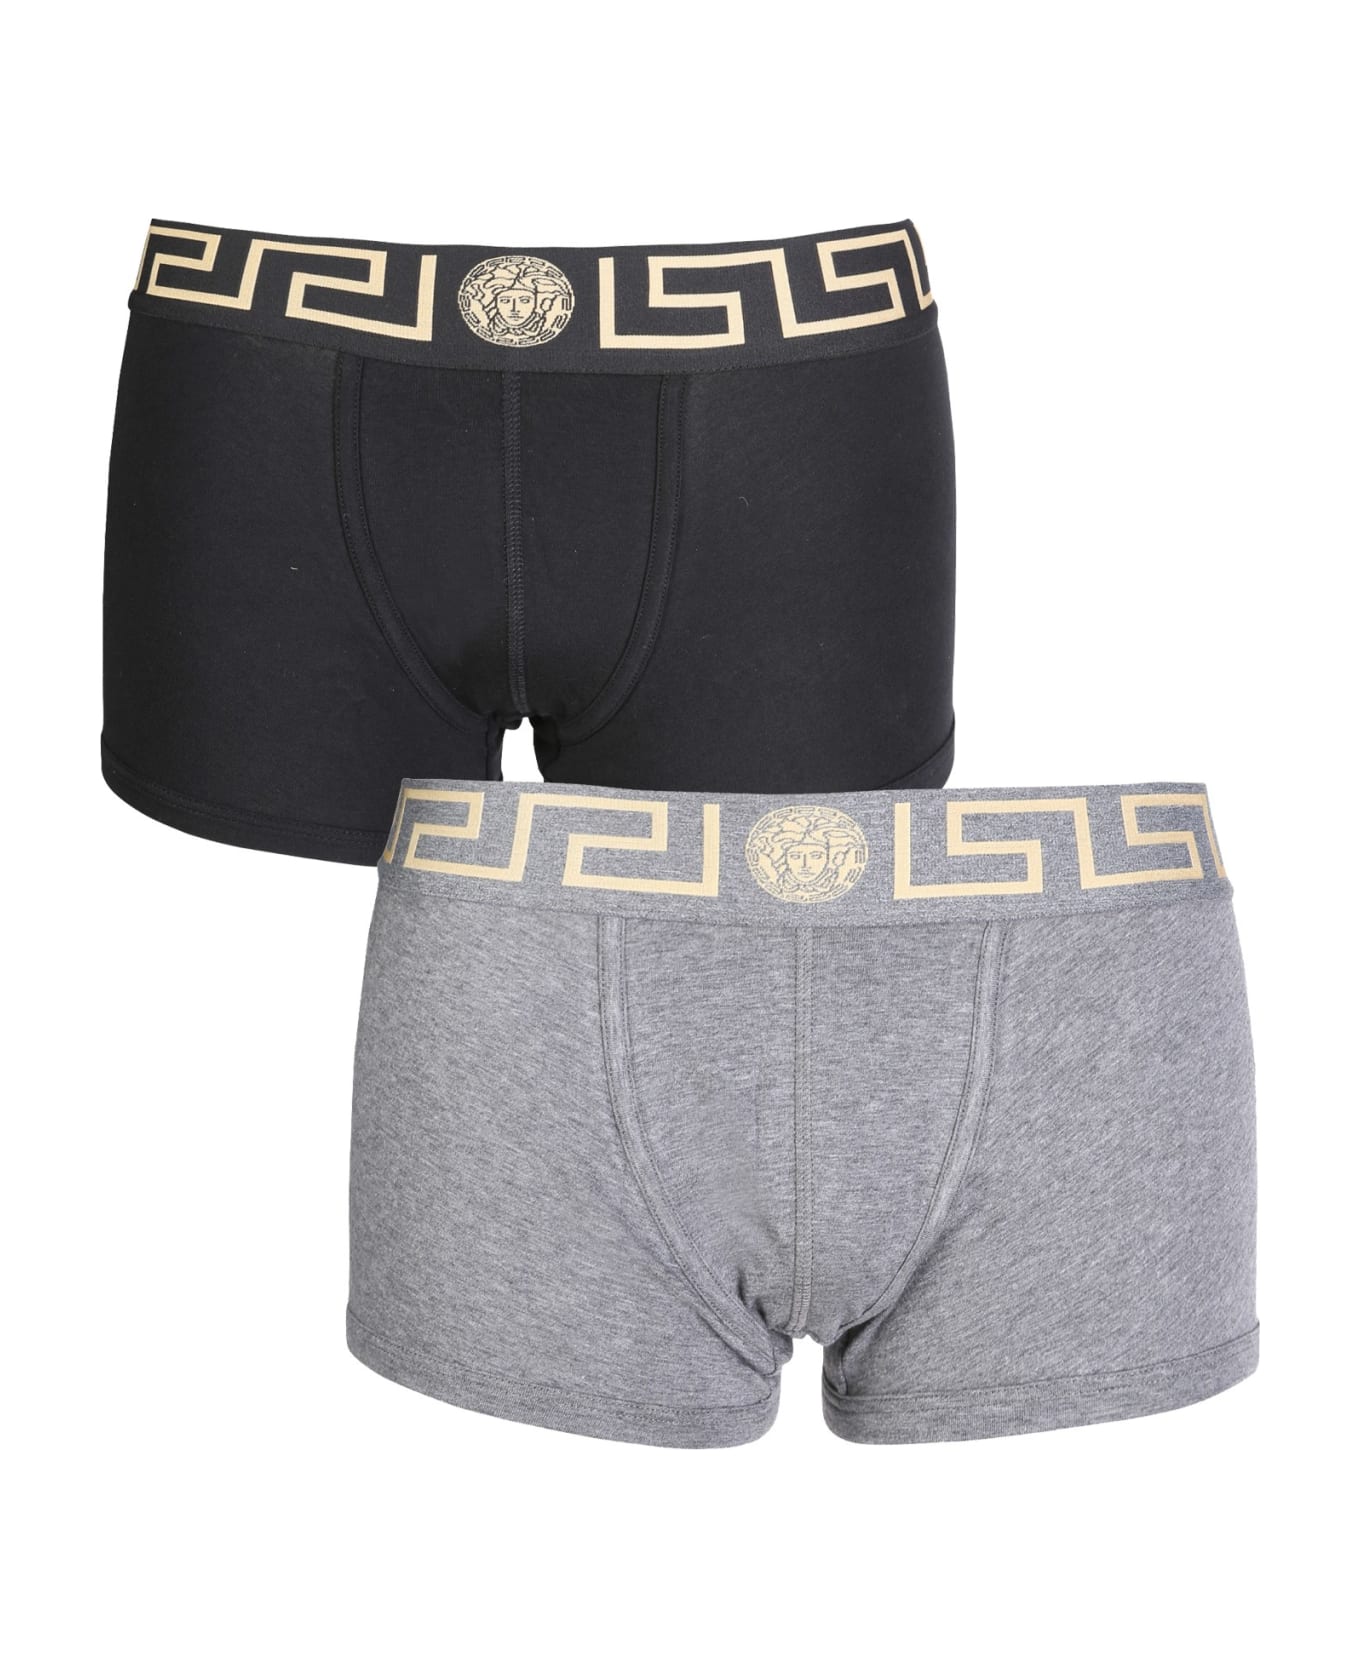 Versace Pack Of Two Boxer Shorts With Greek - NERO GRIGIO